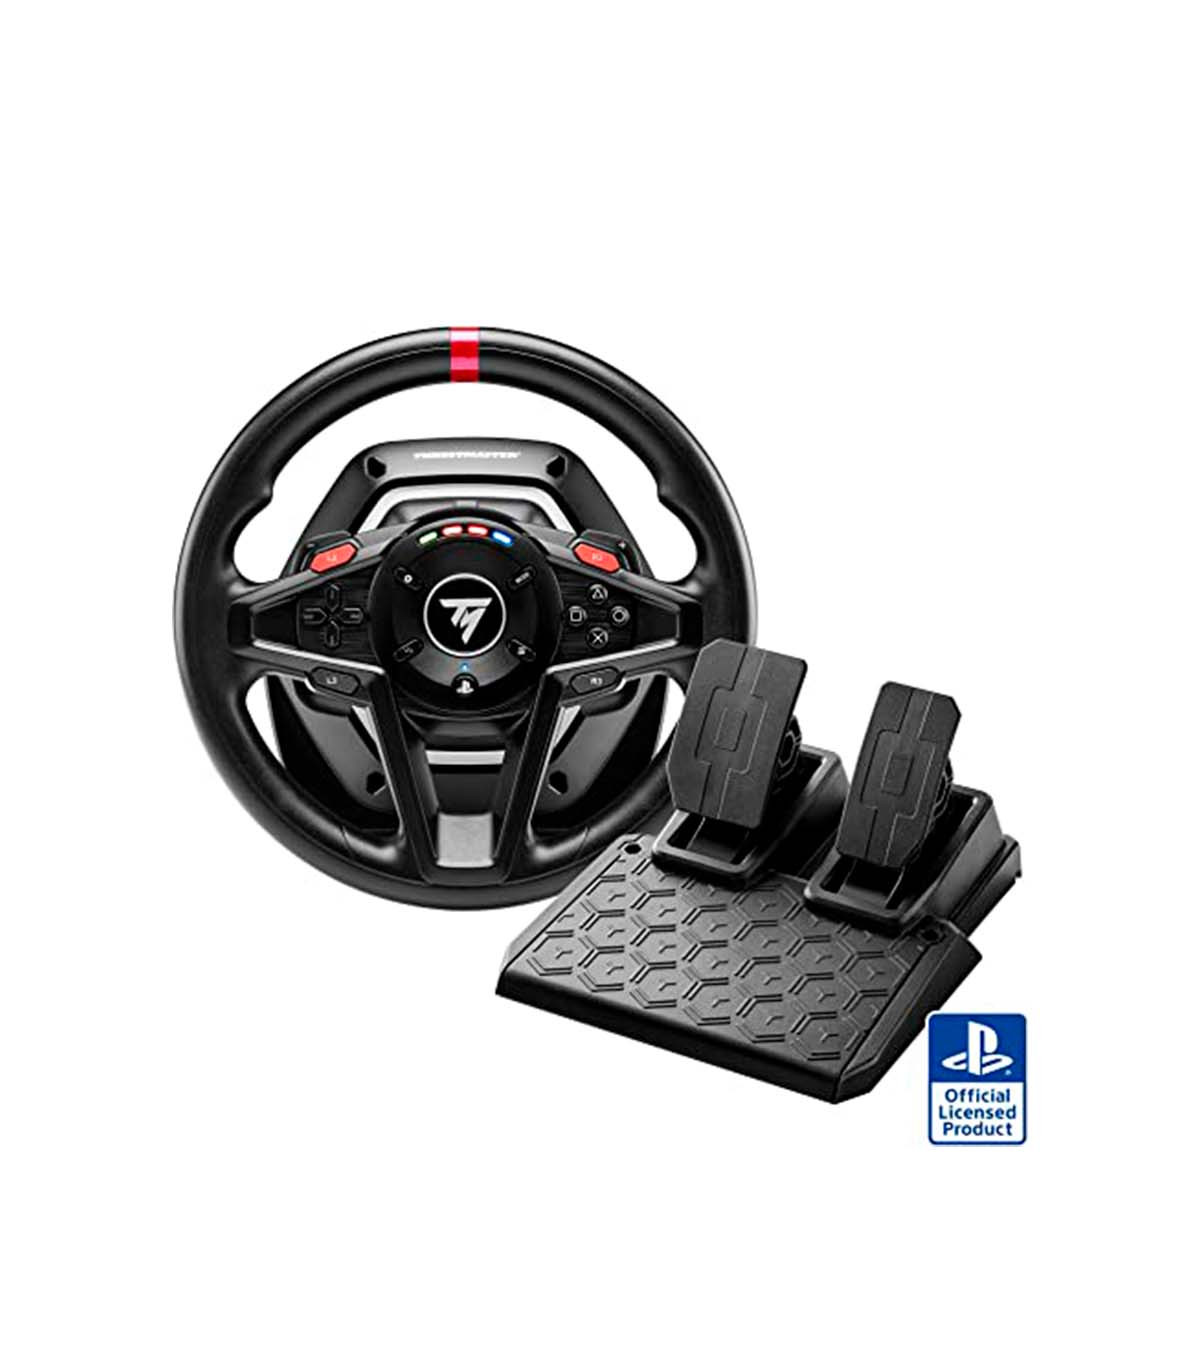 Pack volante y pedales Thrustmaster T248 PS Licence para PS5 y PS4